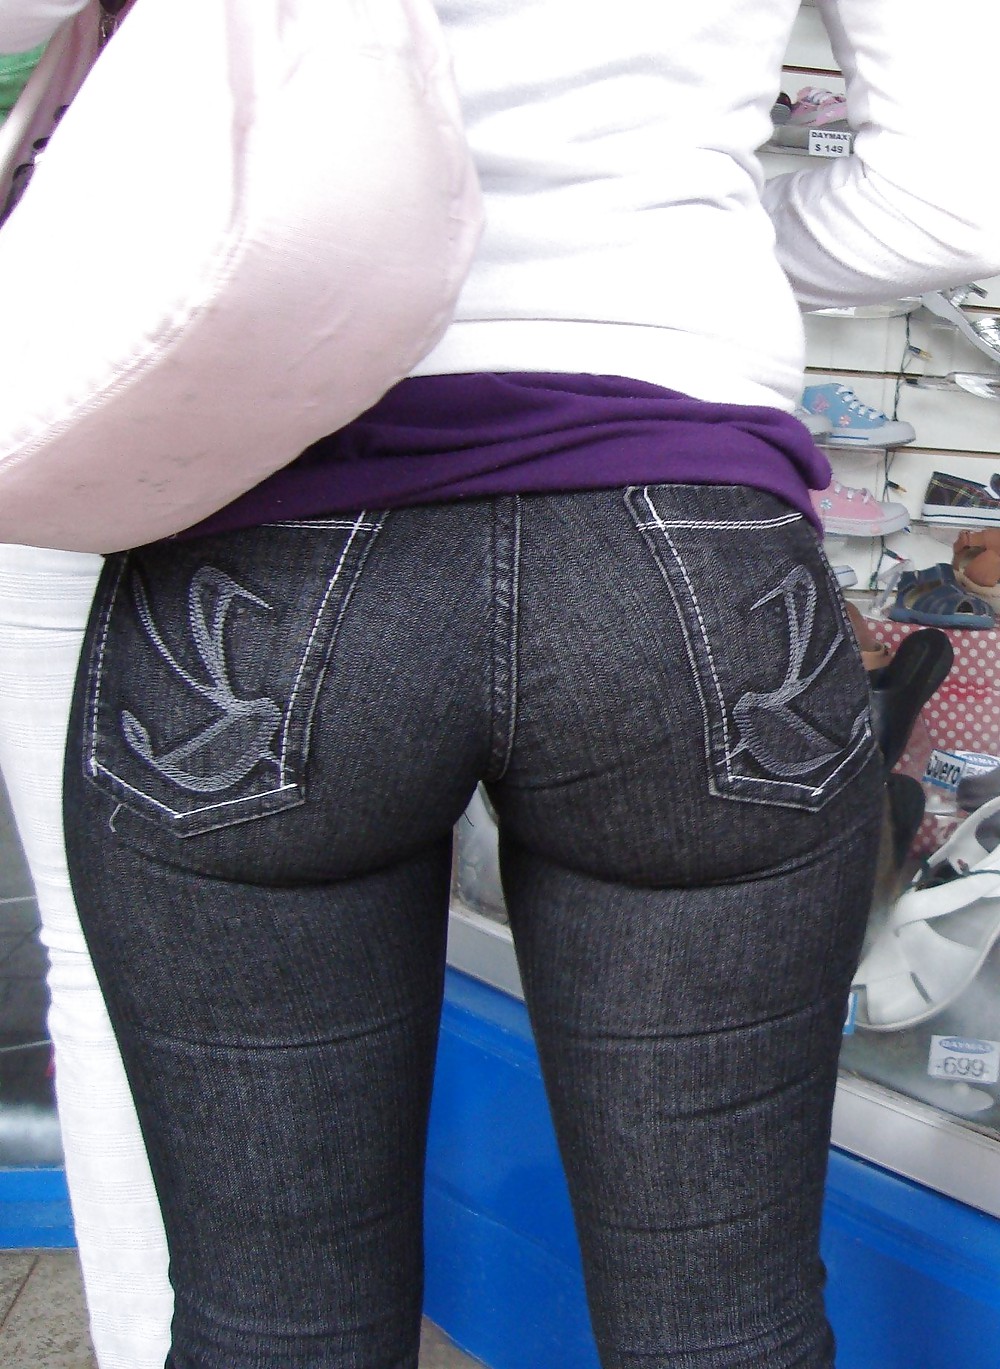 Asses in jeans #5 #2872630